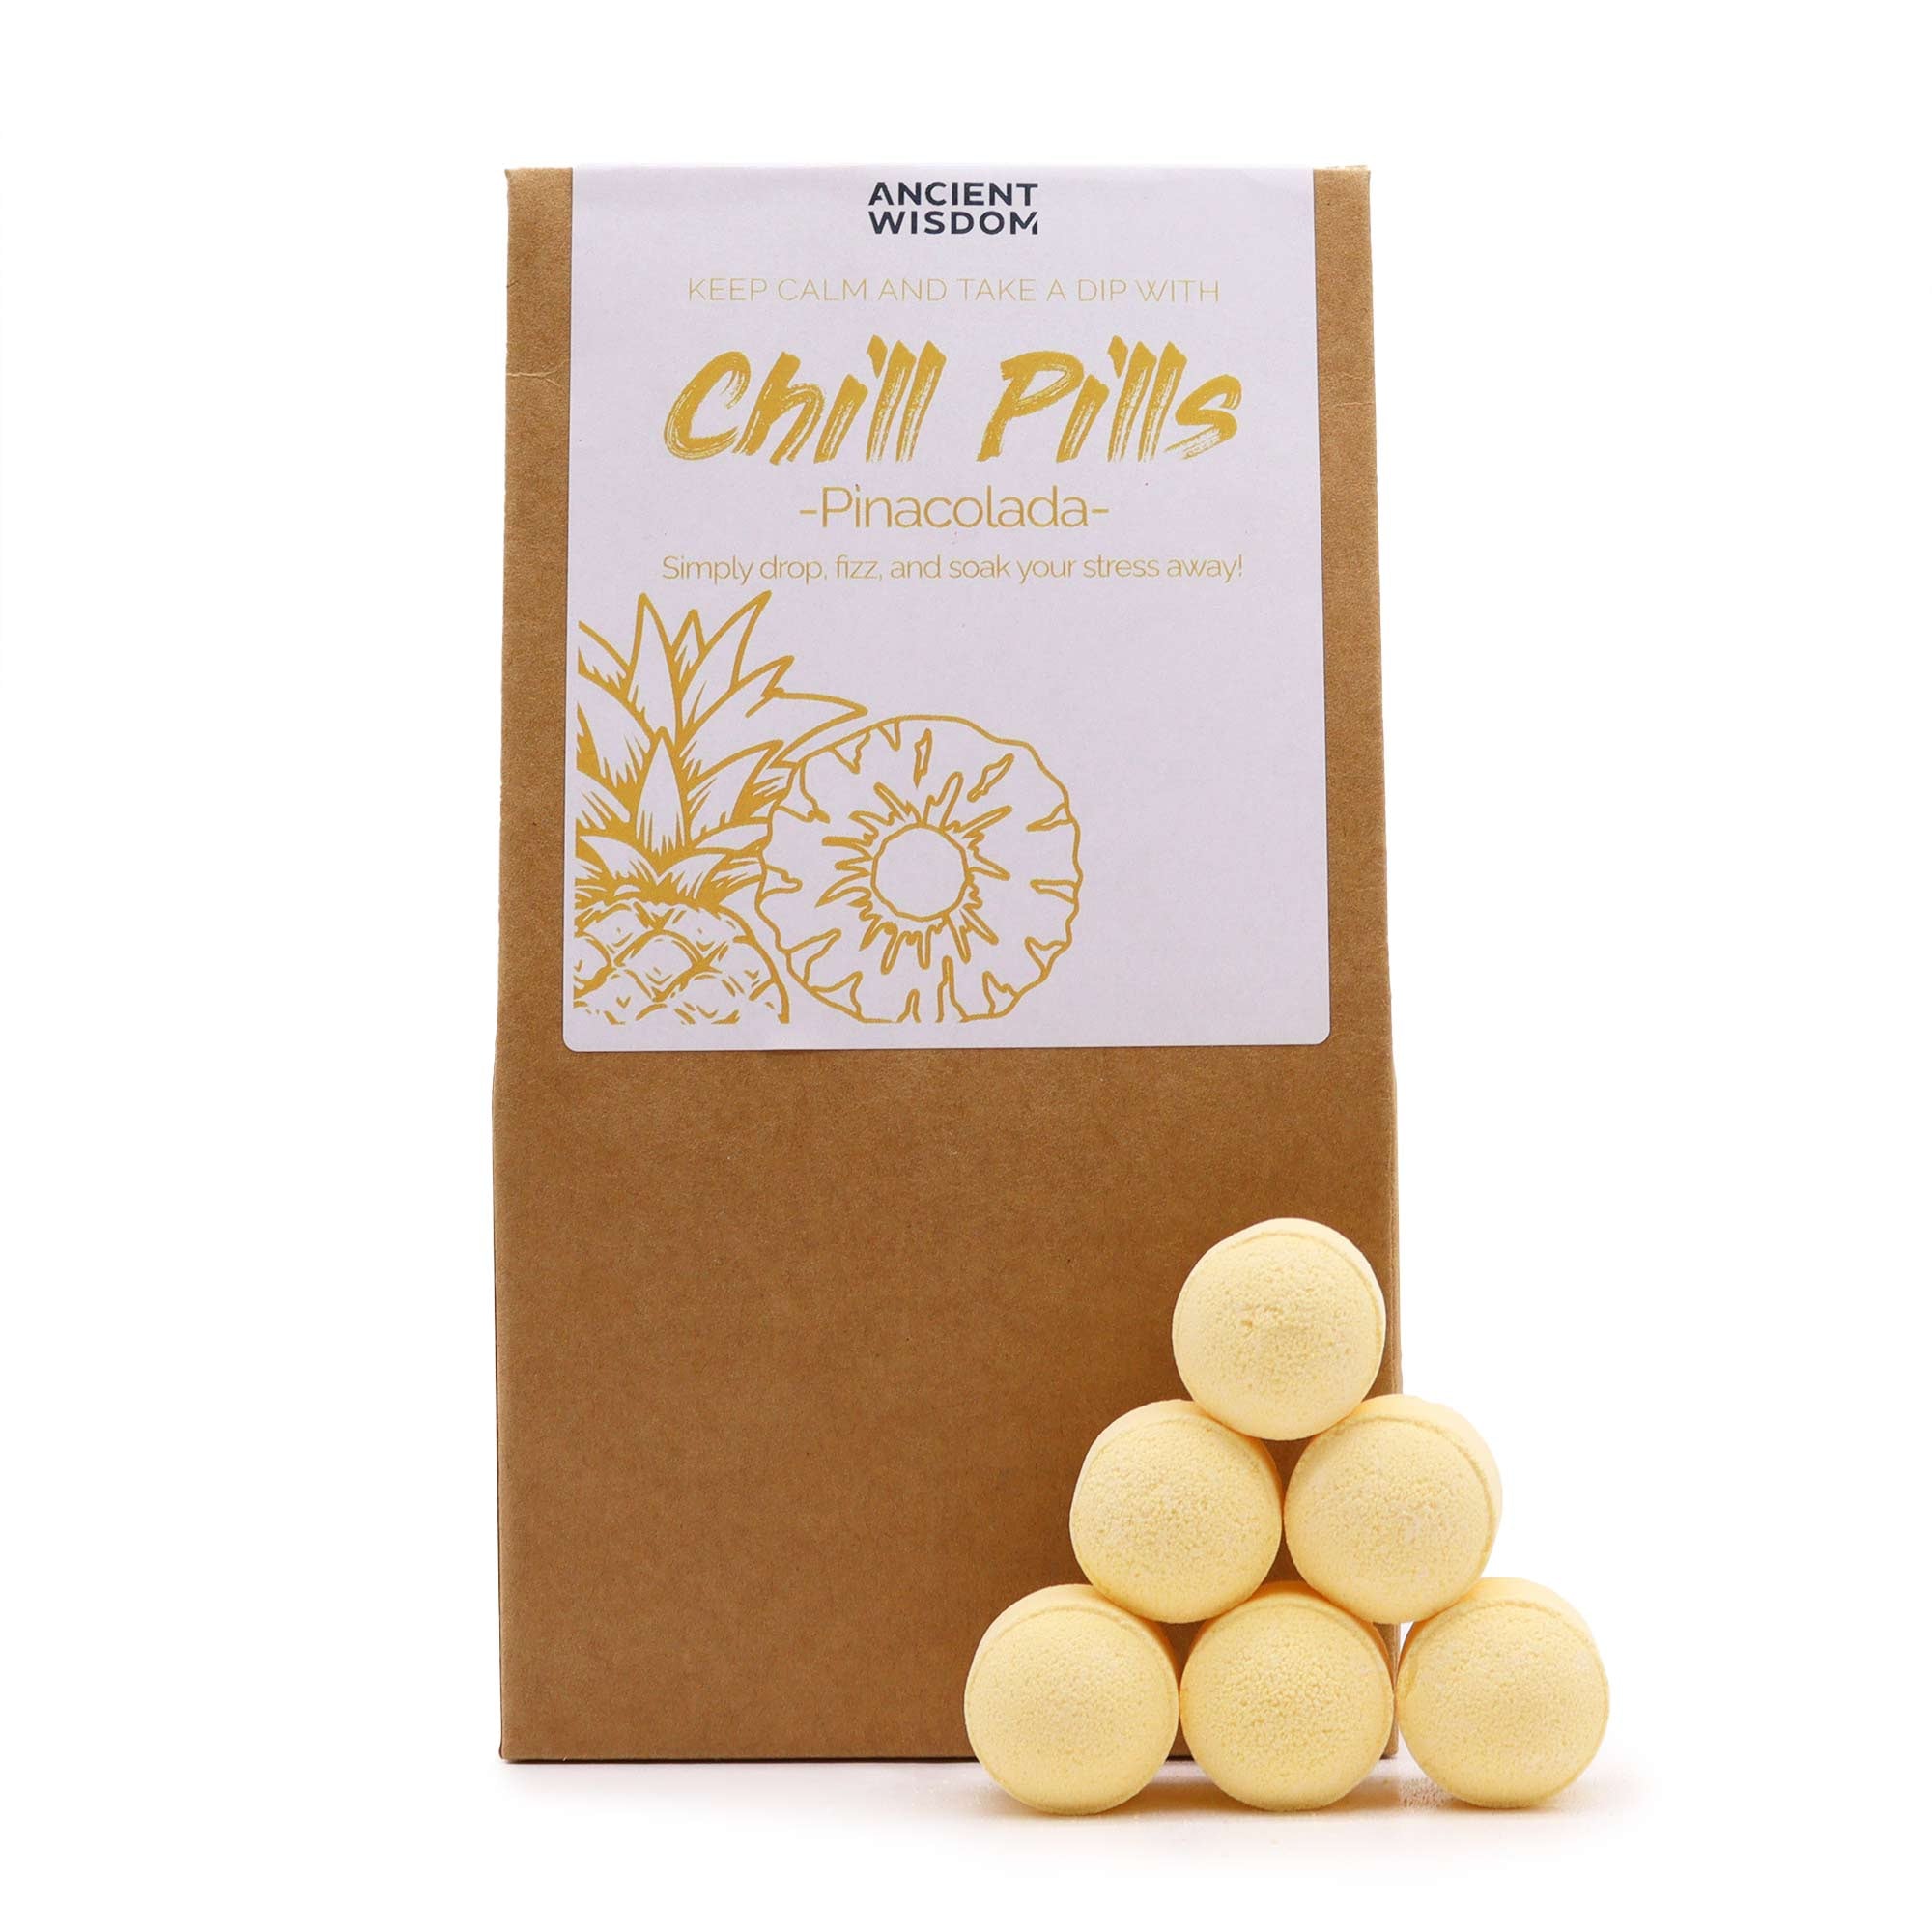 View Chill Pills Gift Pack 350g Pinacolada information